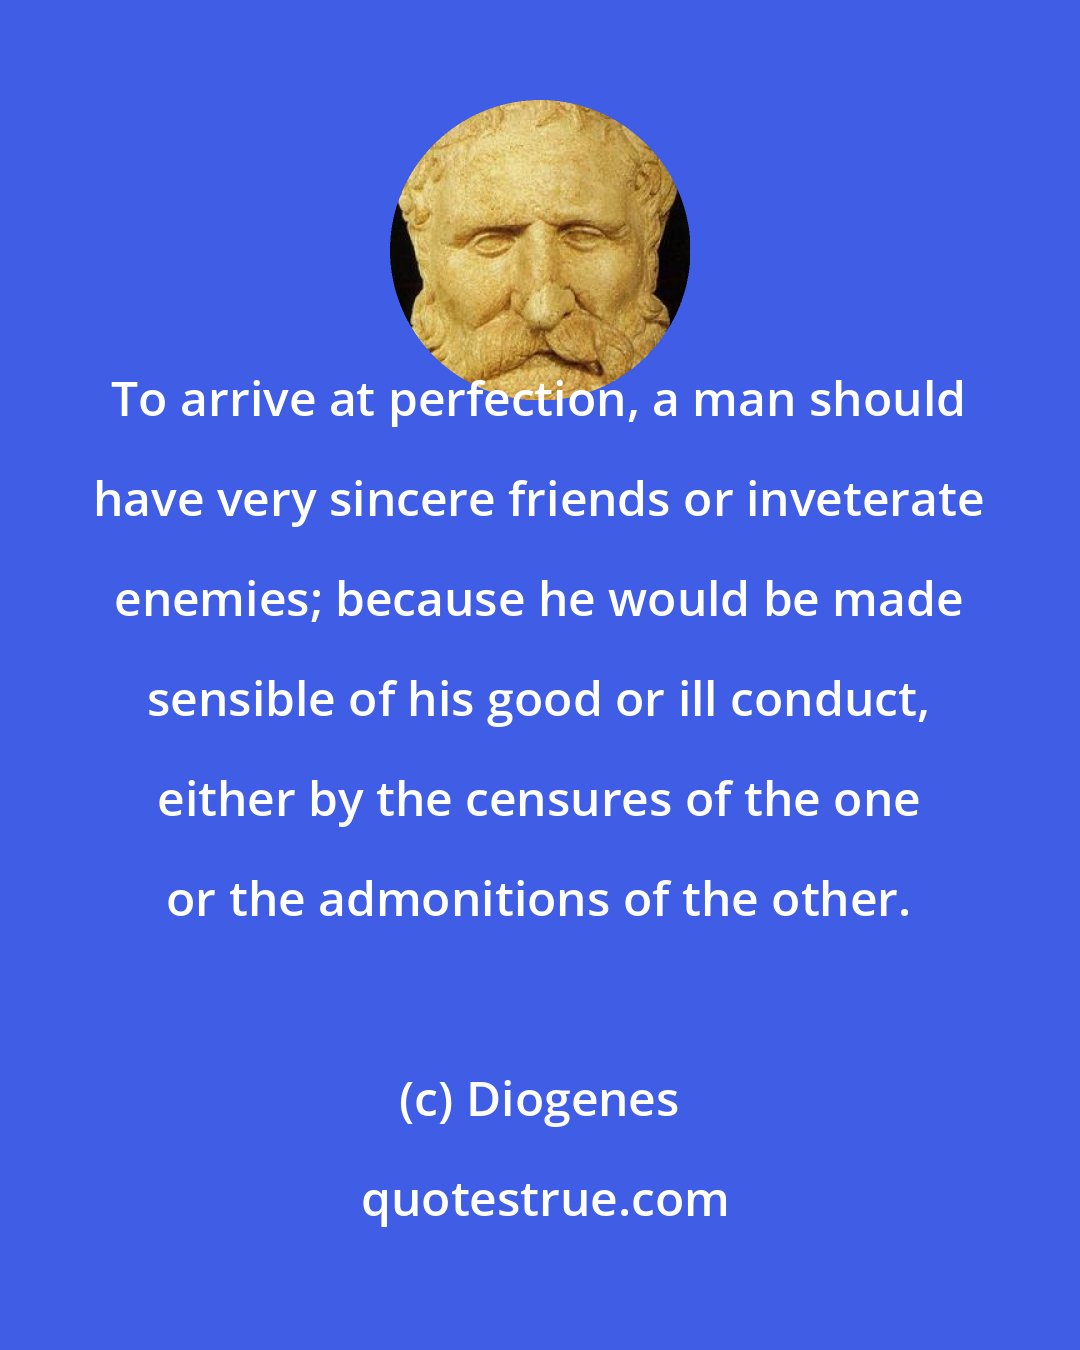 Diogenes: To arrive at perfection, a man should have very sincere friends or inveterate enemies; because he would be made sensible of his good or ill conduct, either by the censures of the one or the admonitions of the other.